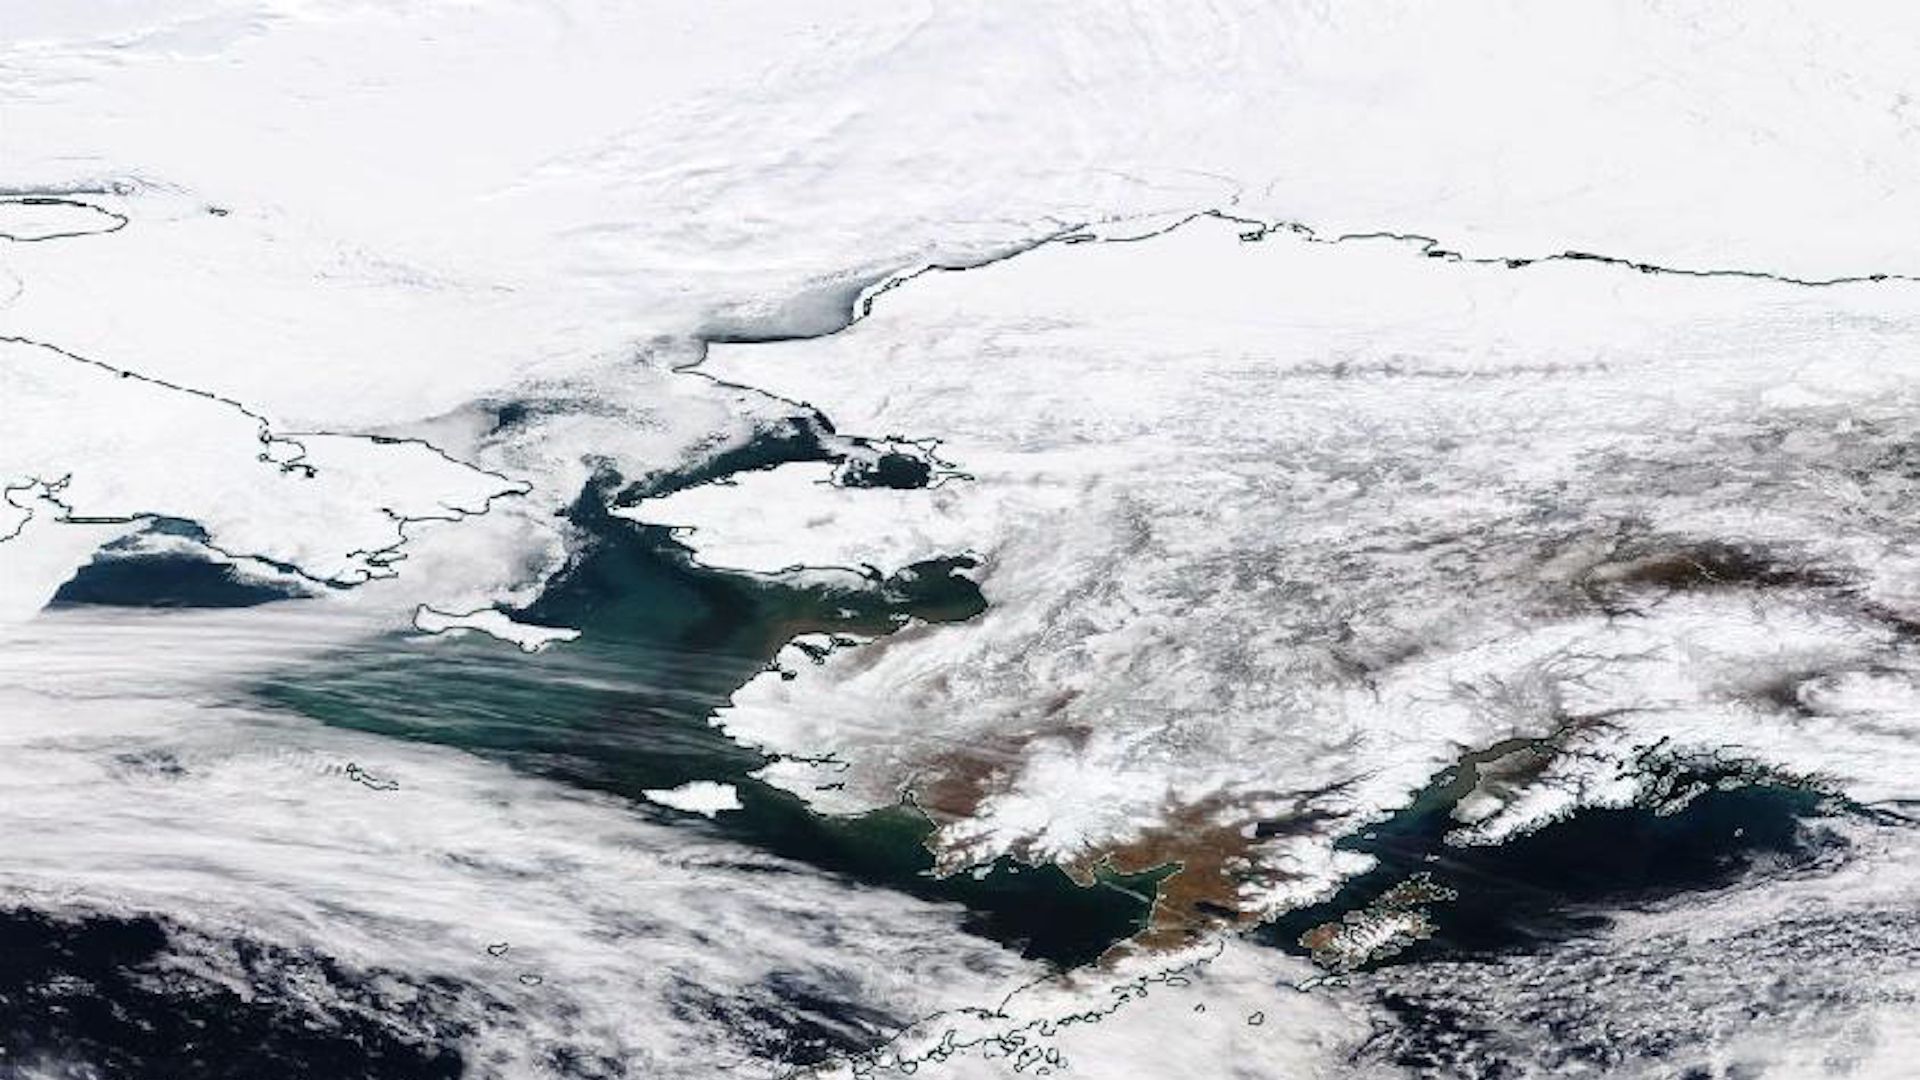 Sea ice seen via satellite has withdrawn from the Bering Sea between Alaska and Russia.